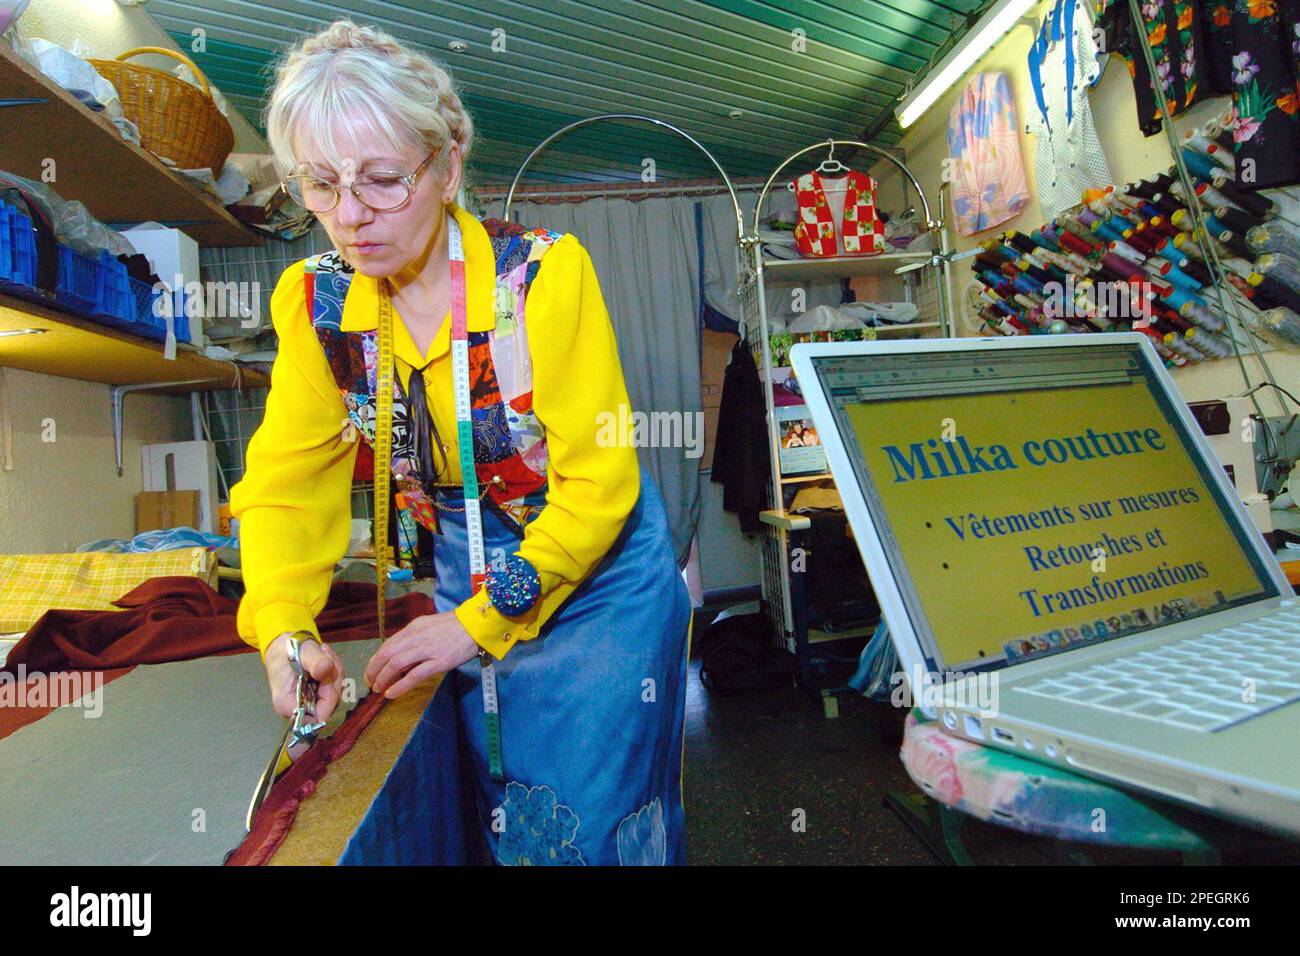 Milka Budimir, works in her couture shop, in Bourg Les Valences, southern  France, Tuesday Dec.14, 2004. Budimir is expected to defend next Jan. 31  her web site www.milka.fr against the American food